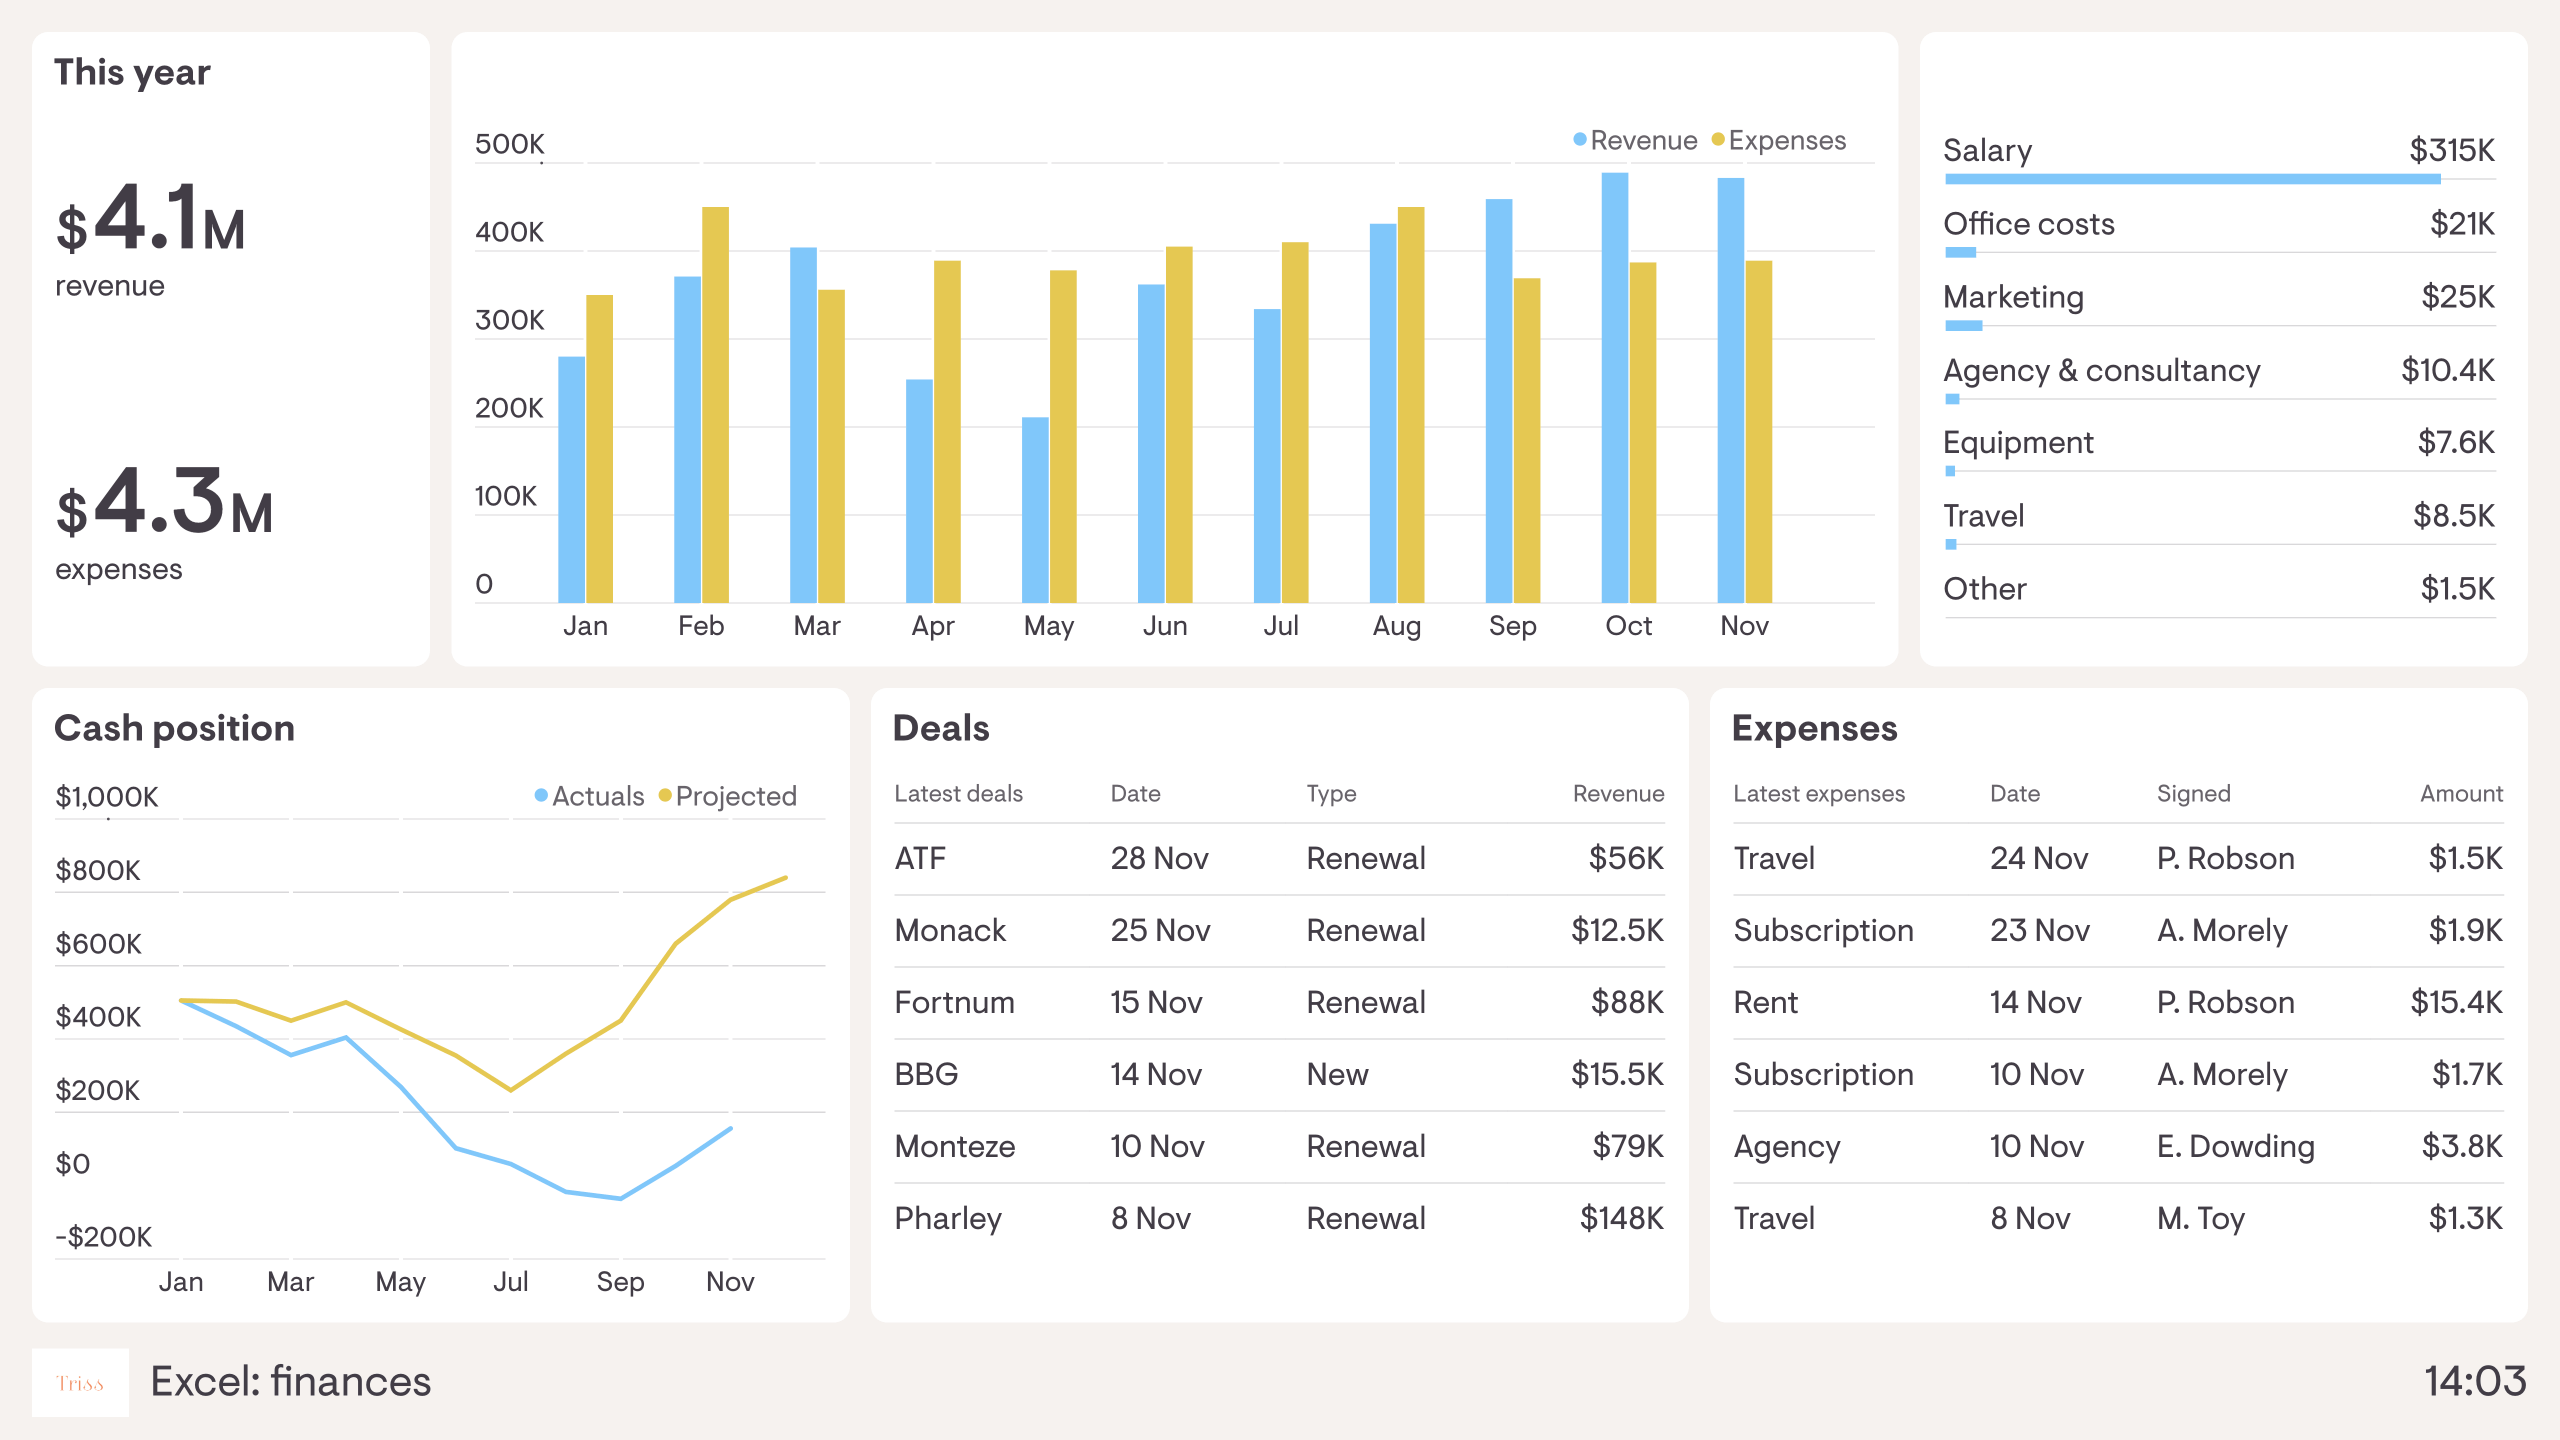 dashboard templates excel free